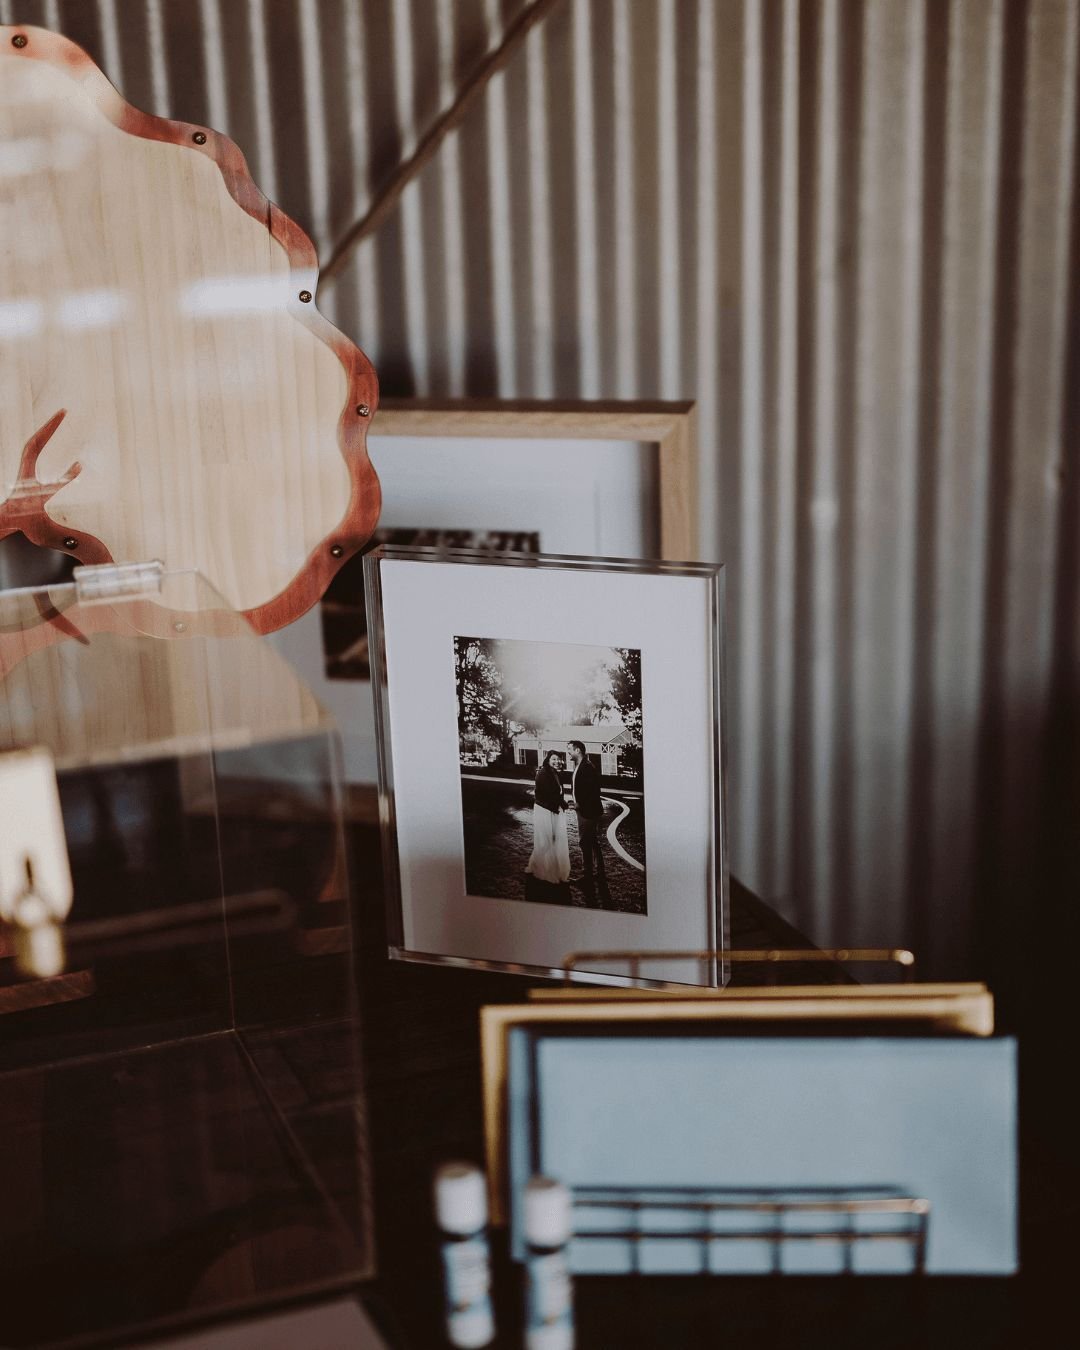 &quot;Three reasons why engagement photos are the perfect addition to your wedding's gift wishing well table: 📸💍✨ 1. They add a personal touch that tells your love story. 2. They serve as beautiful decor that complements your wedding theme. 3. They